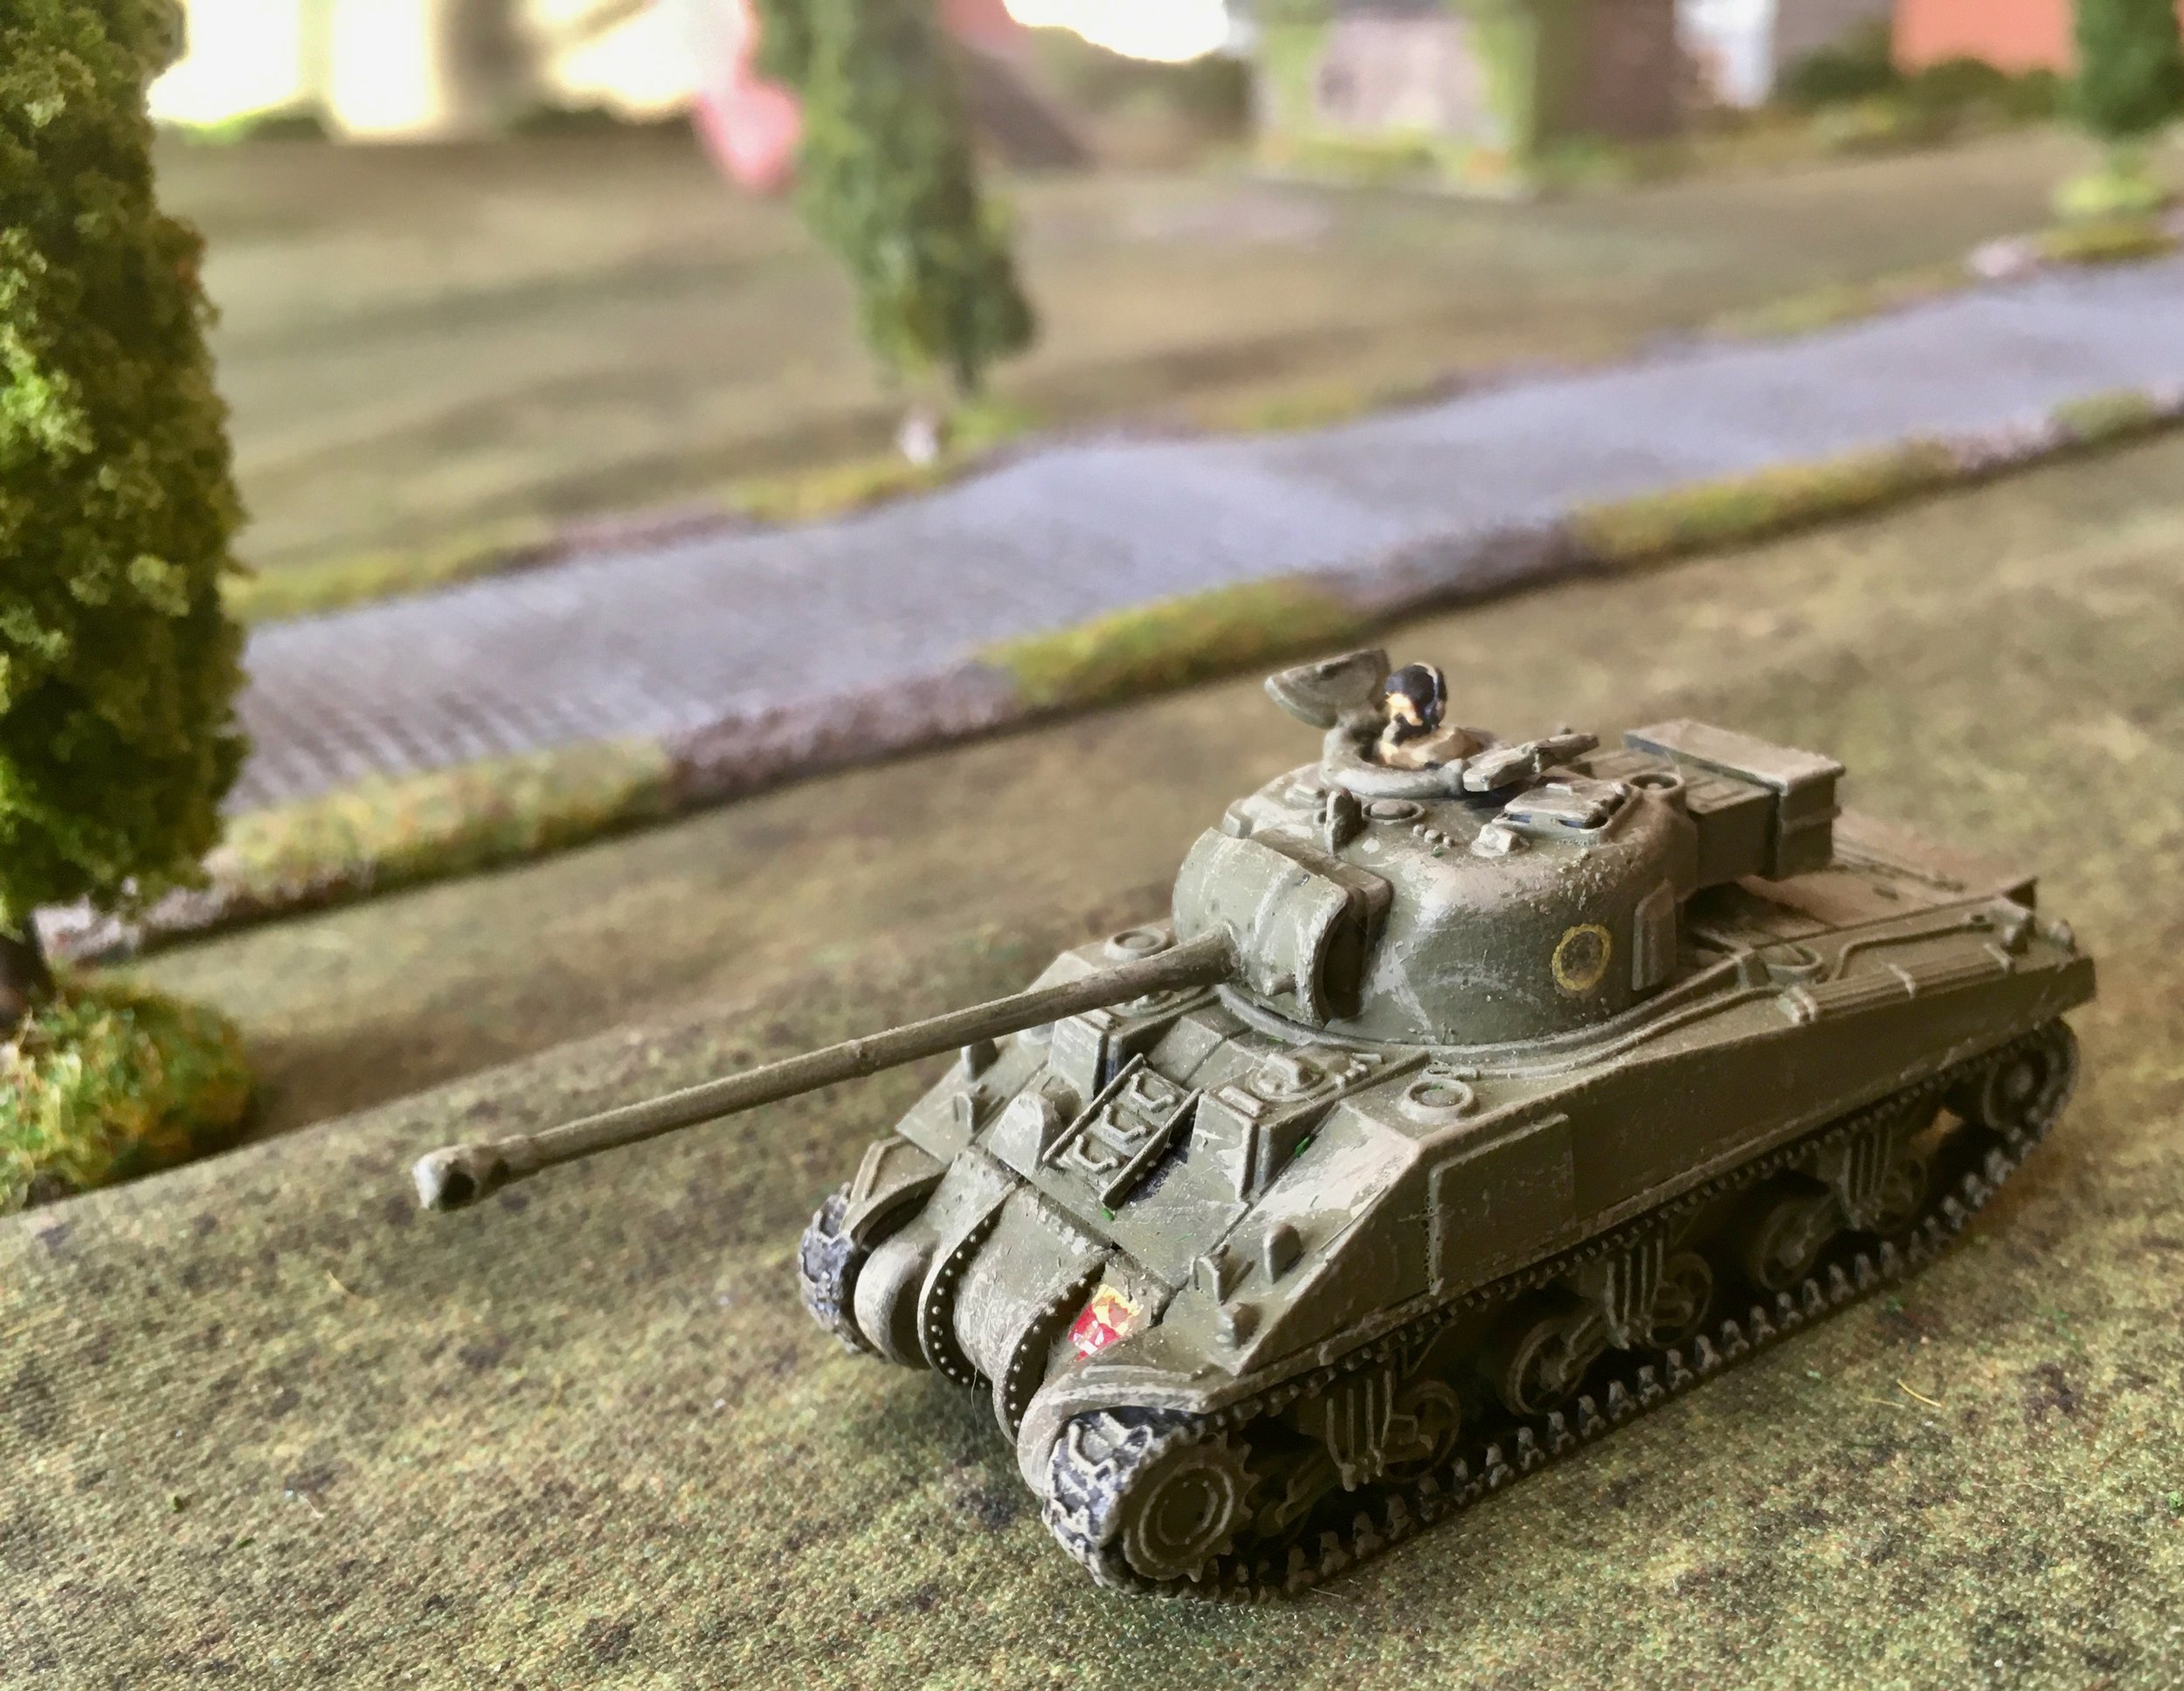 The Cromwells were supported by a Sherman Firefly - on the look out for any German armour...